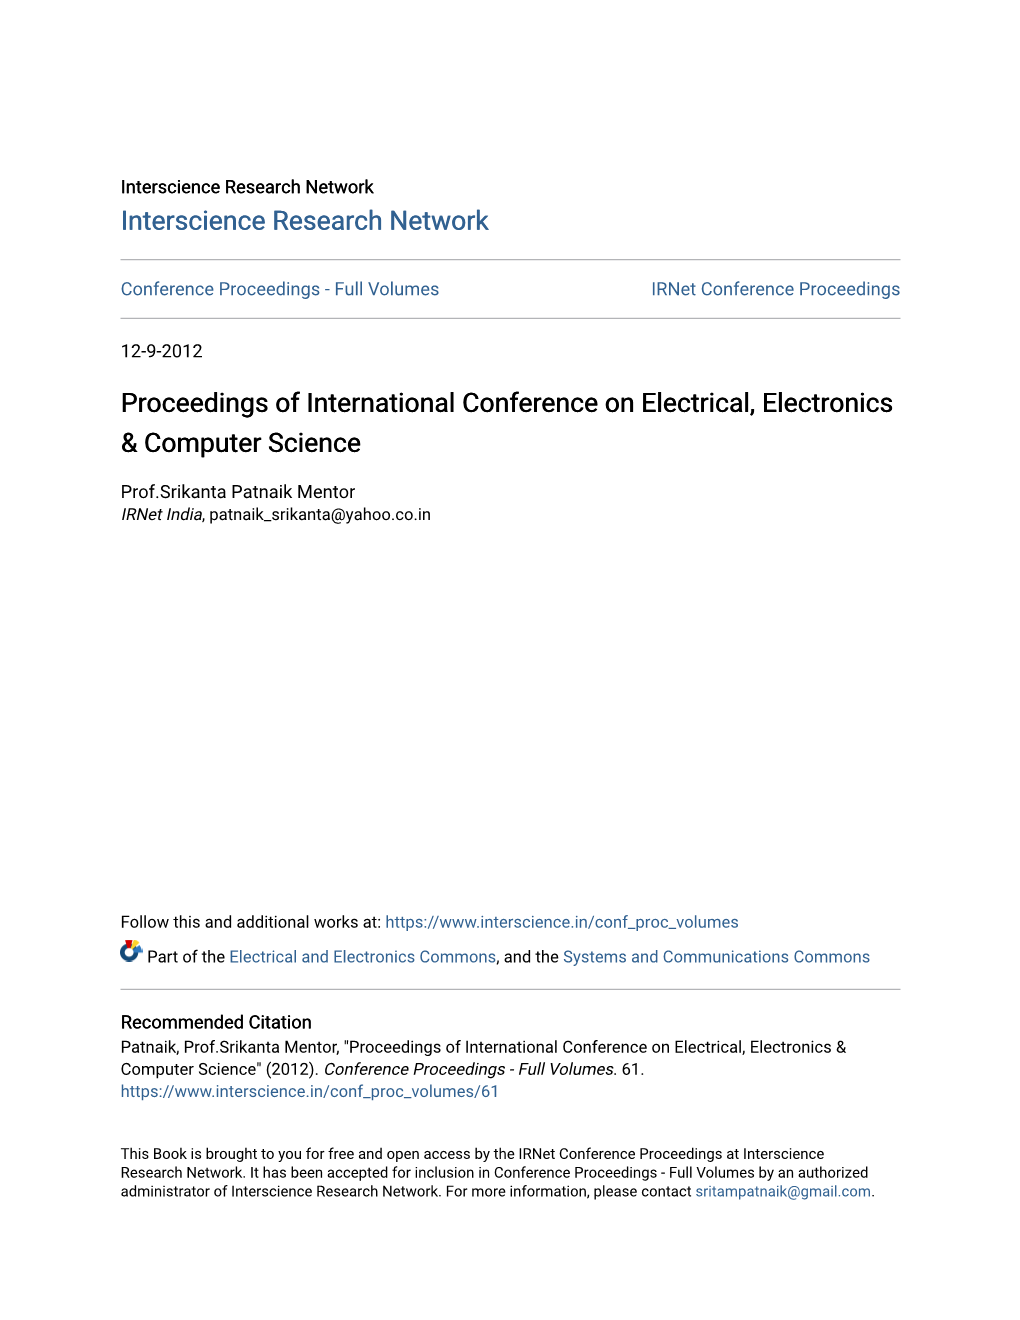 Proceedings of International Conference on Electrical, Electronics & Computer Science